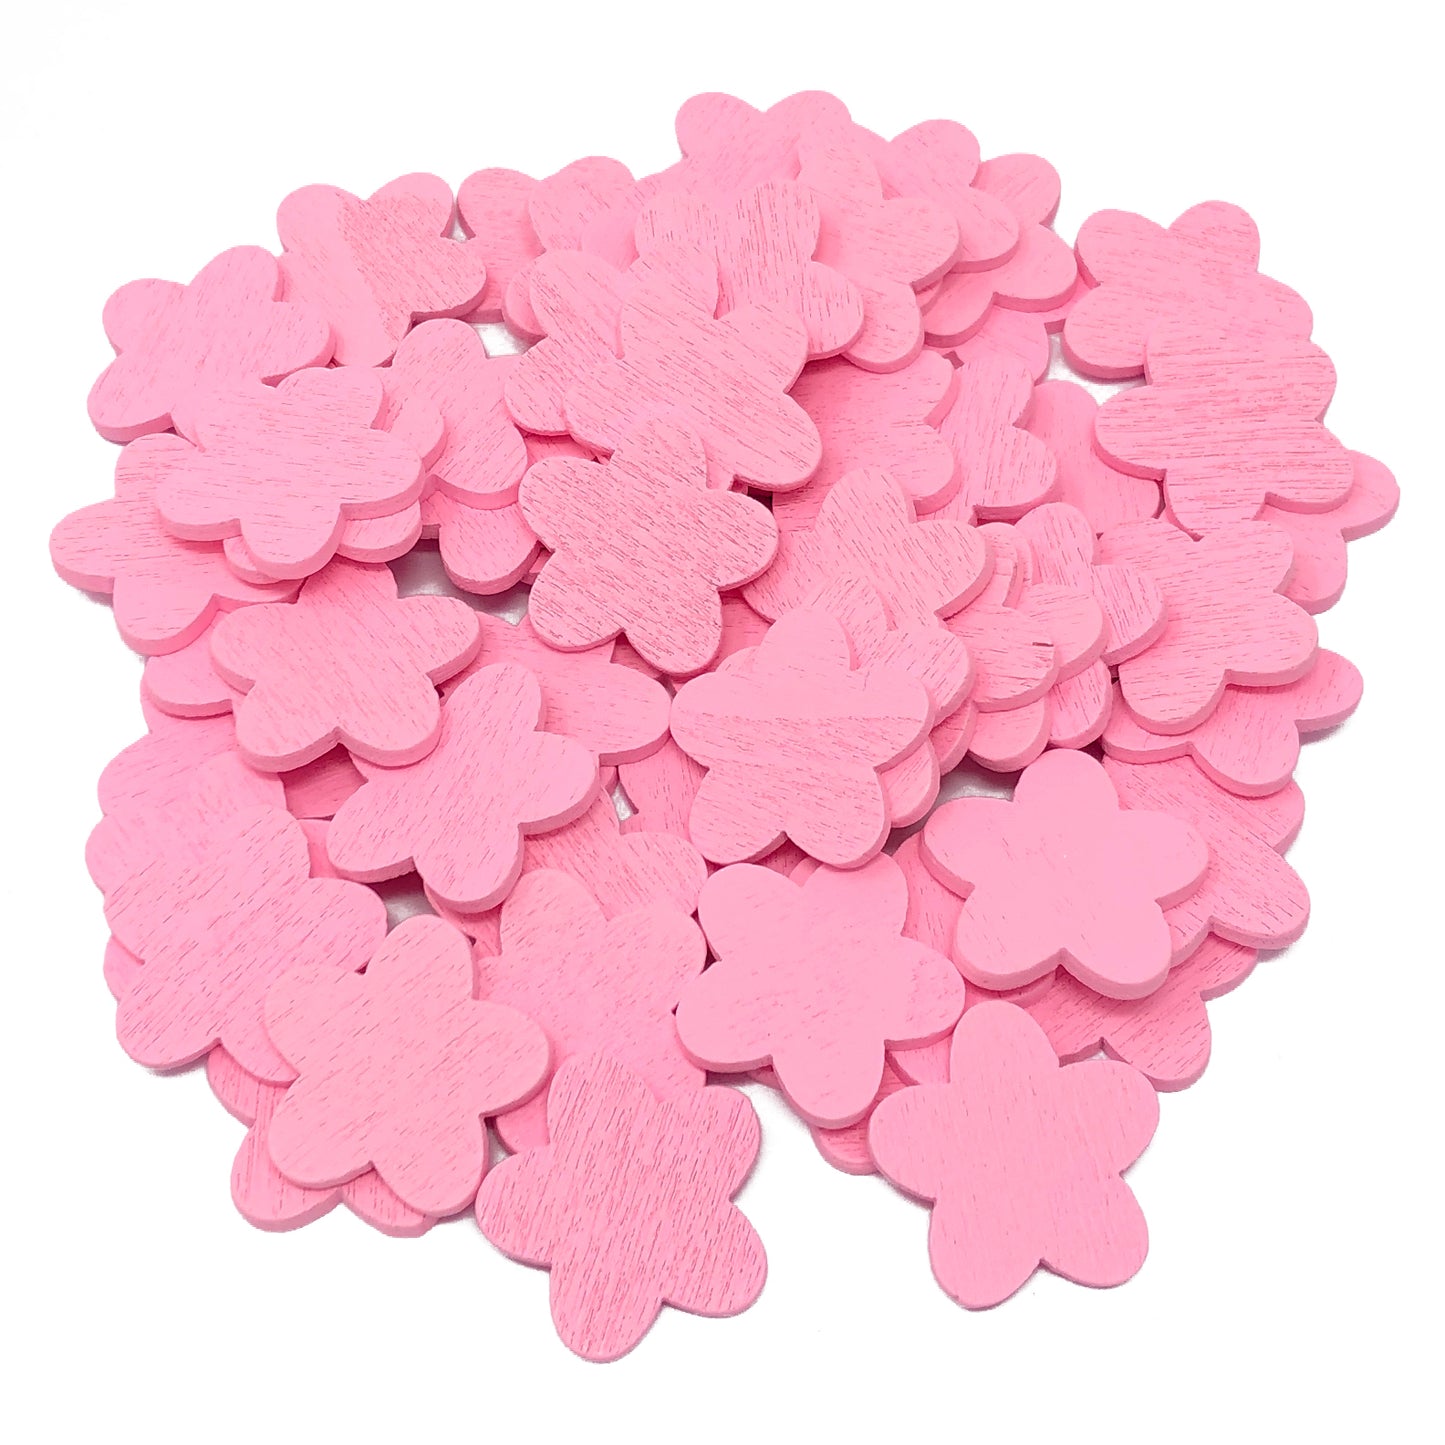 Pink 18mm Wooden Craft Coloured Flowers